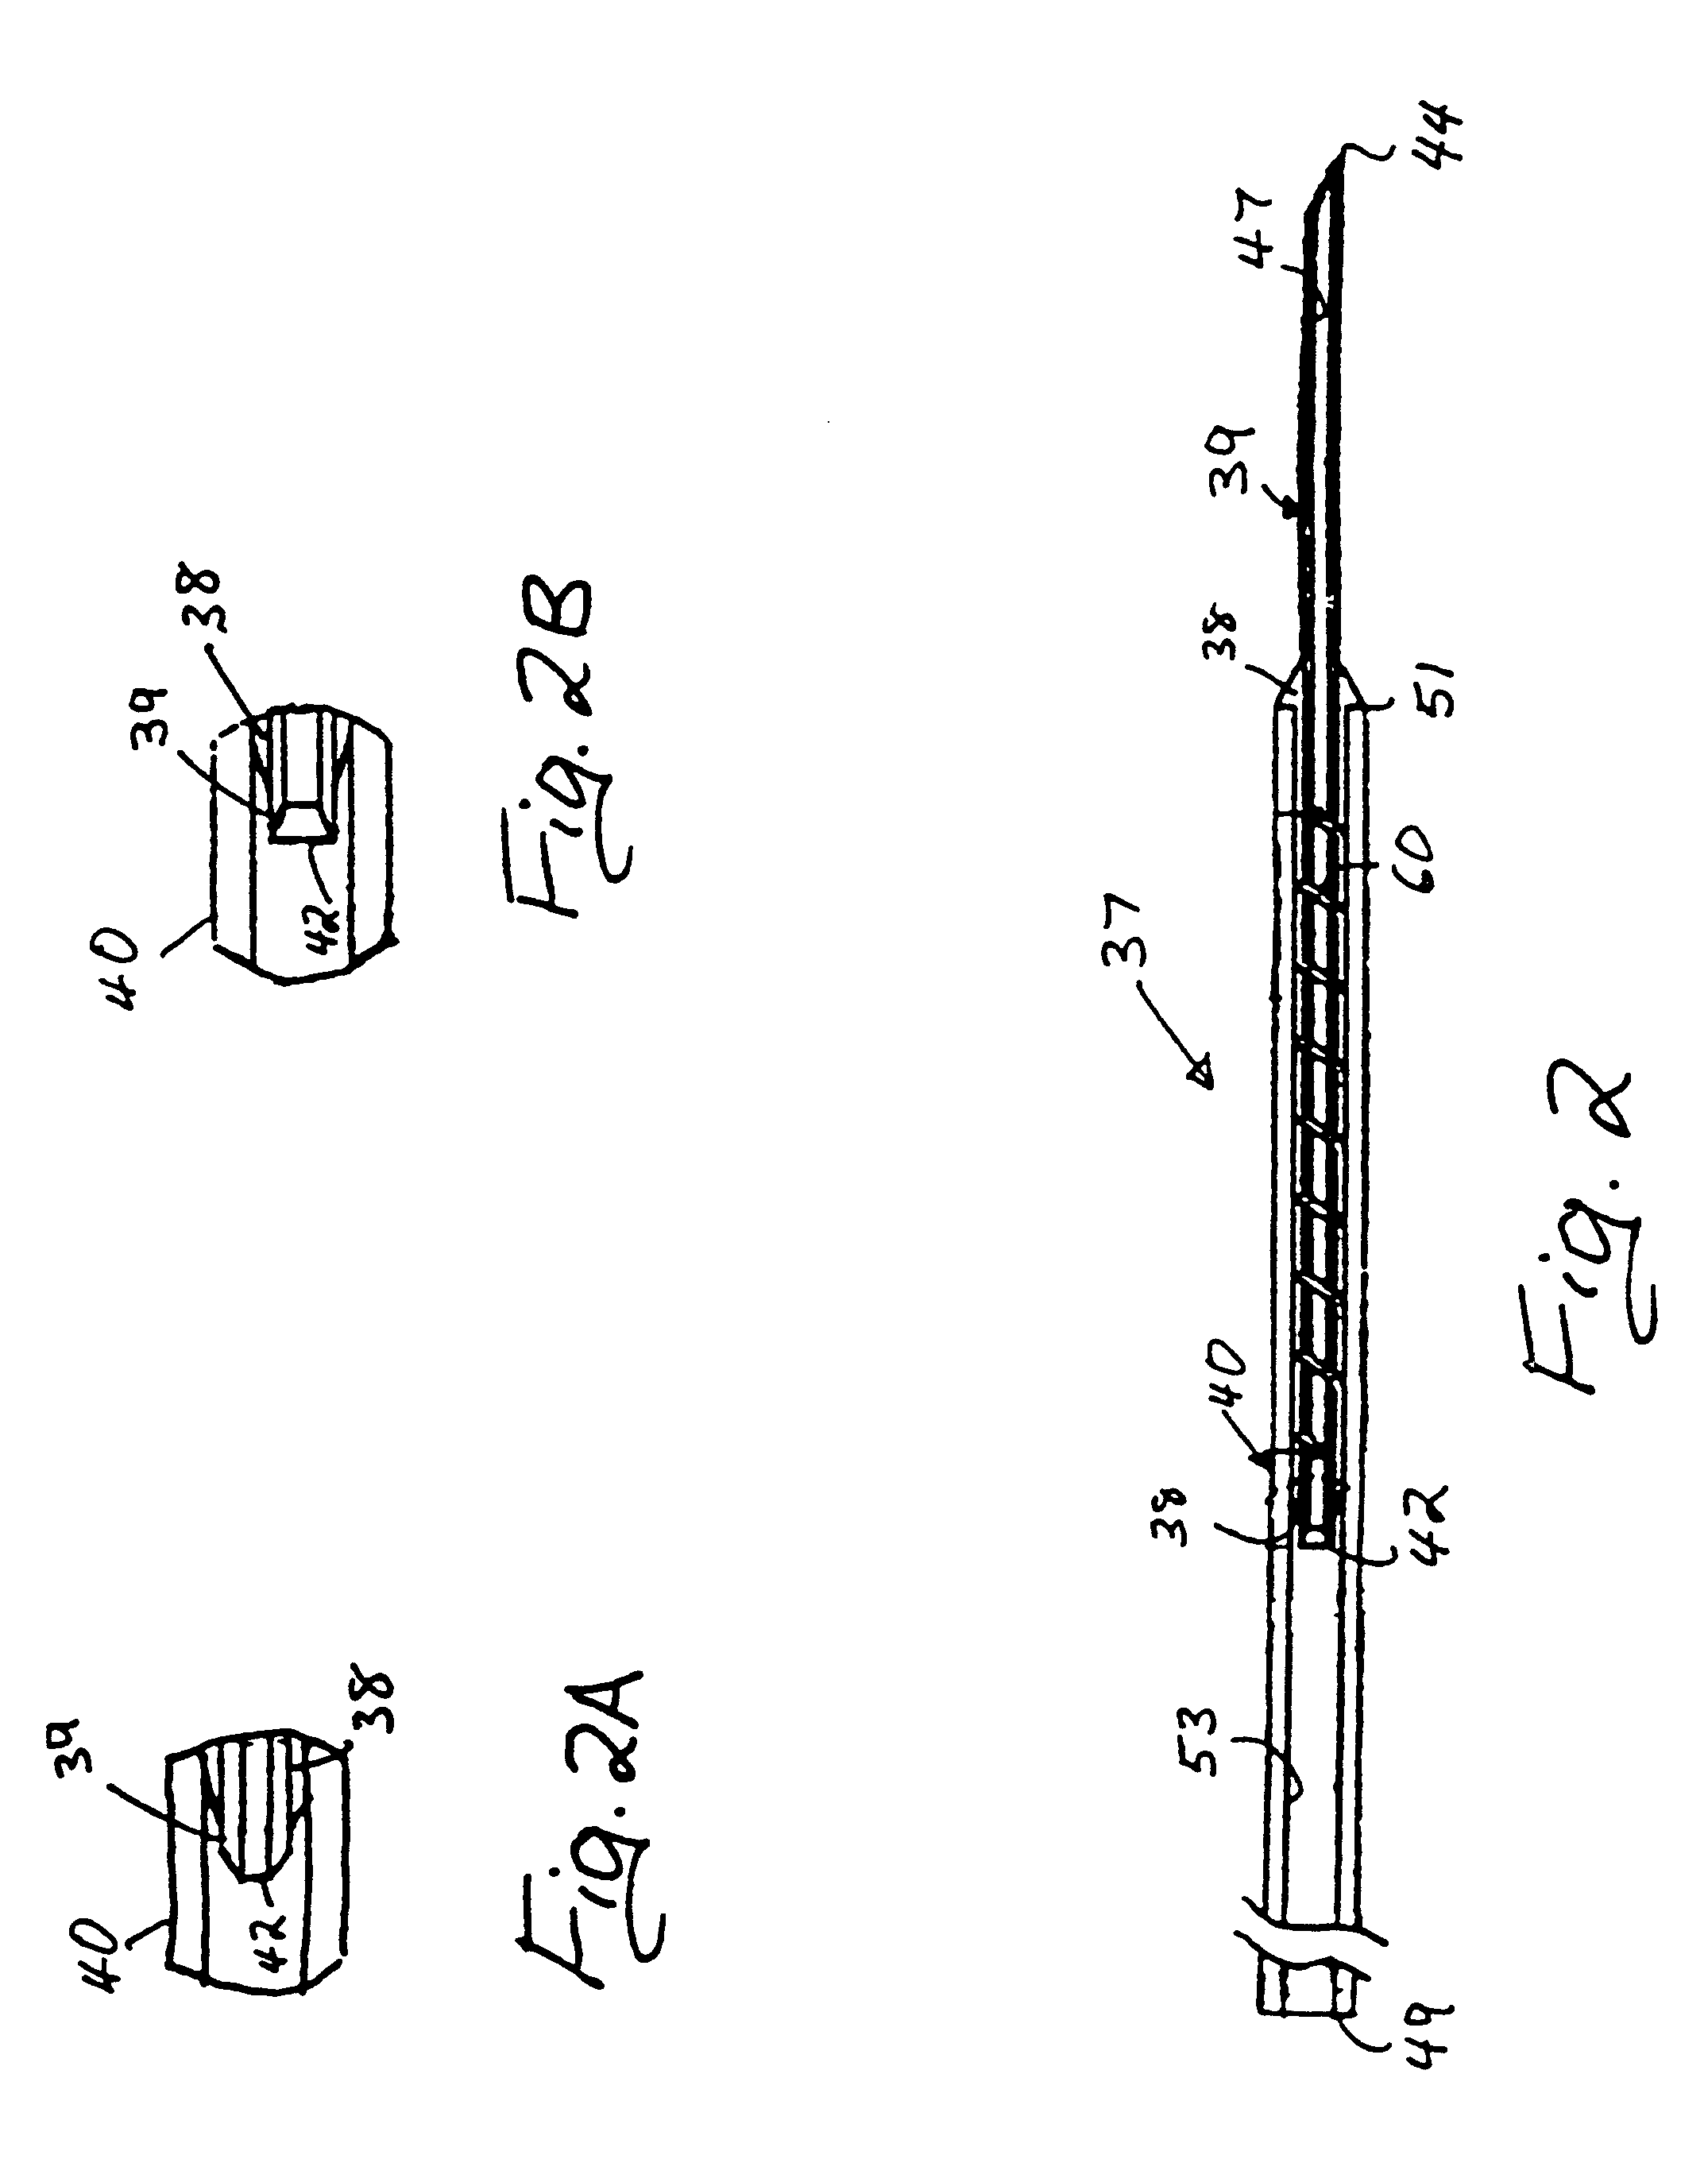 Medical injection apparatus